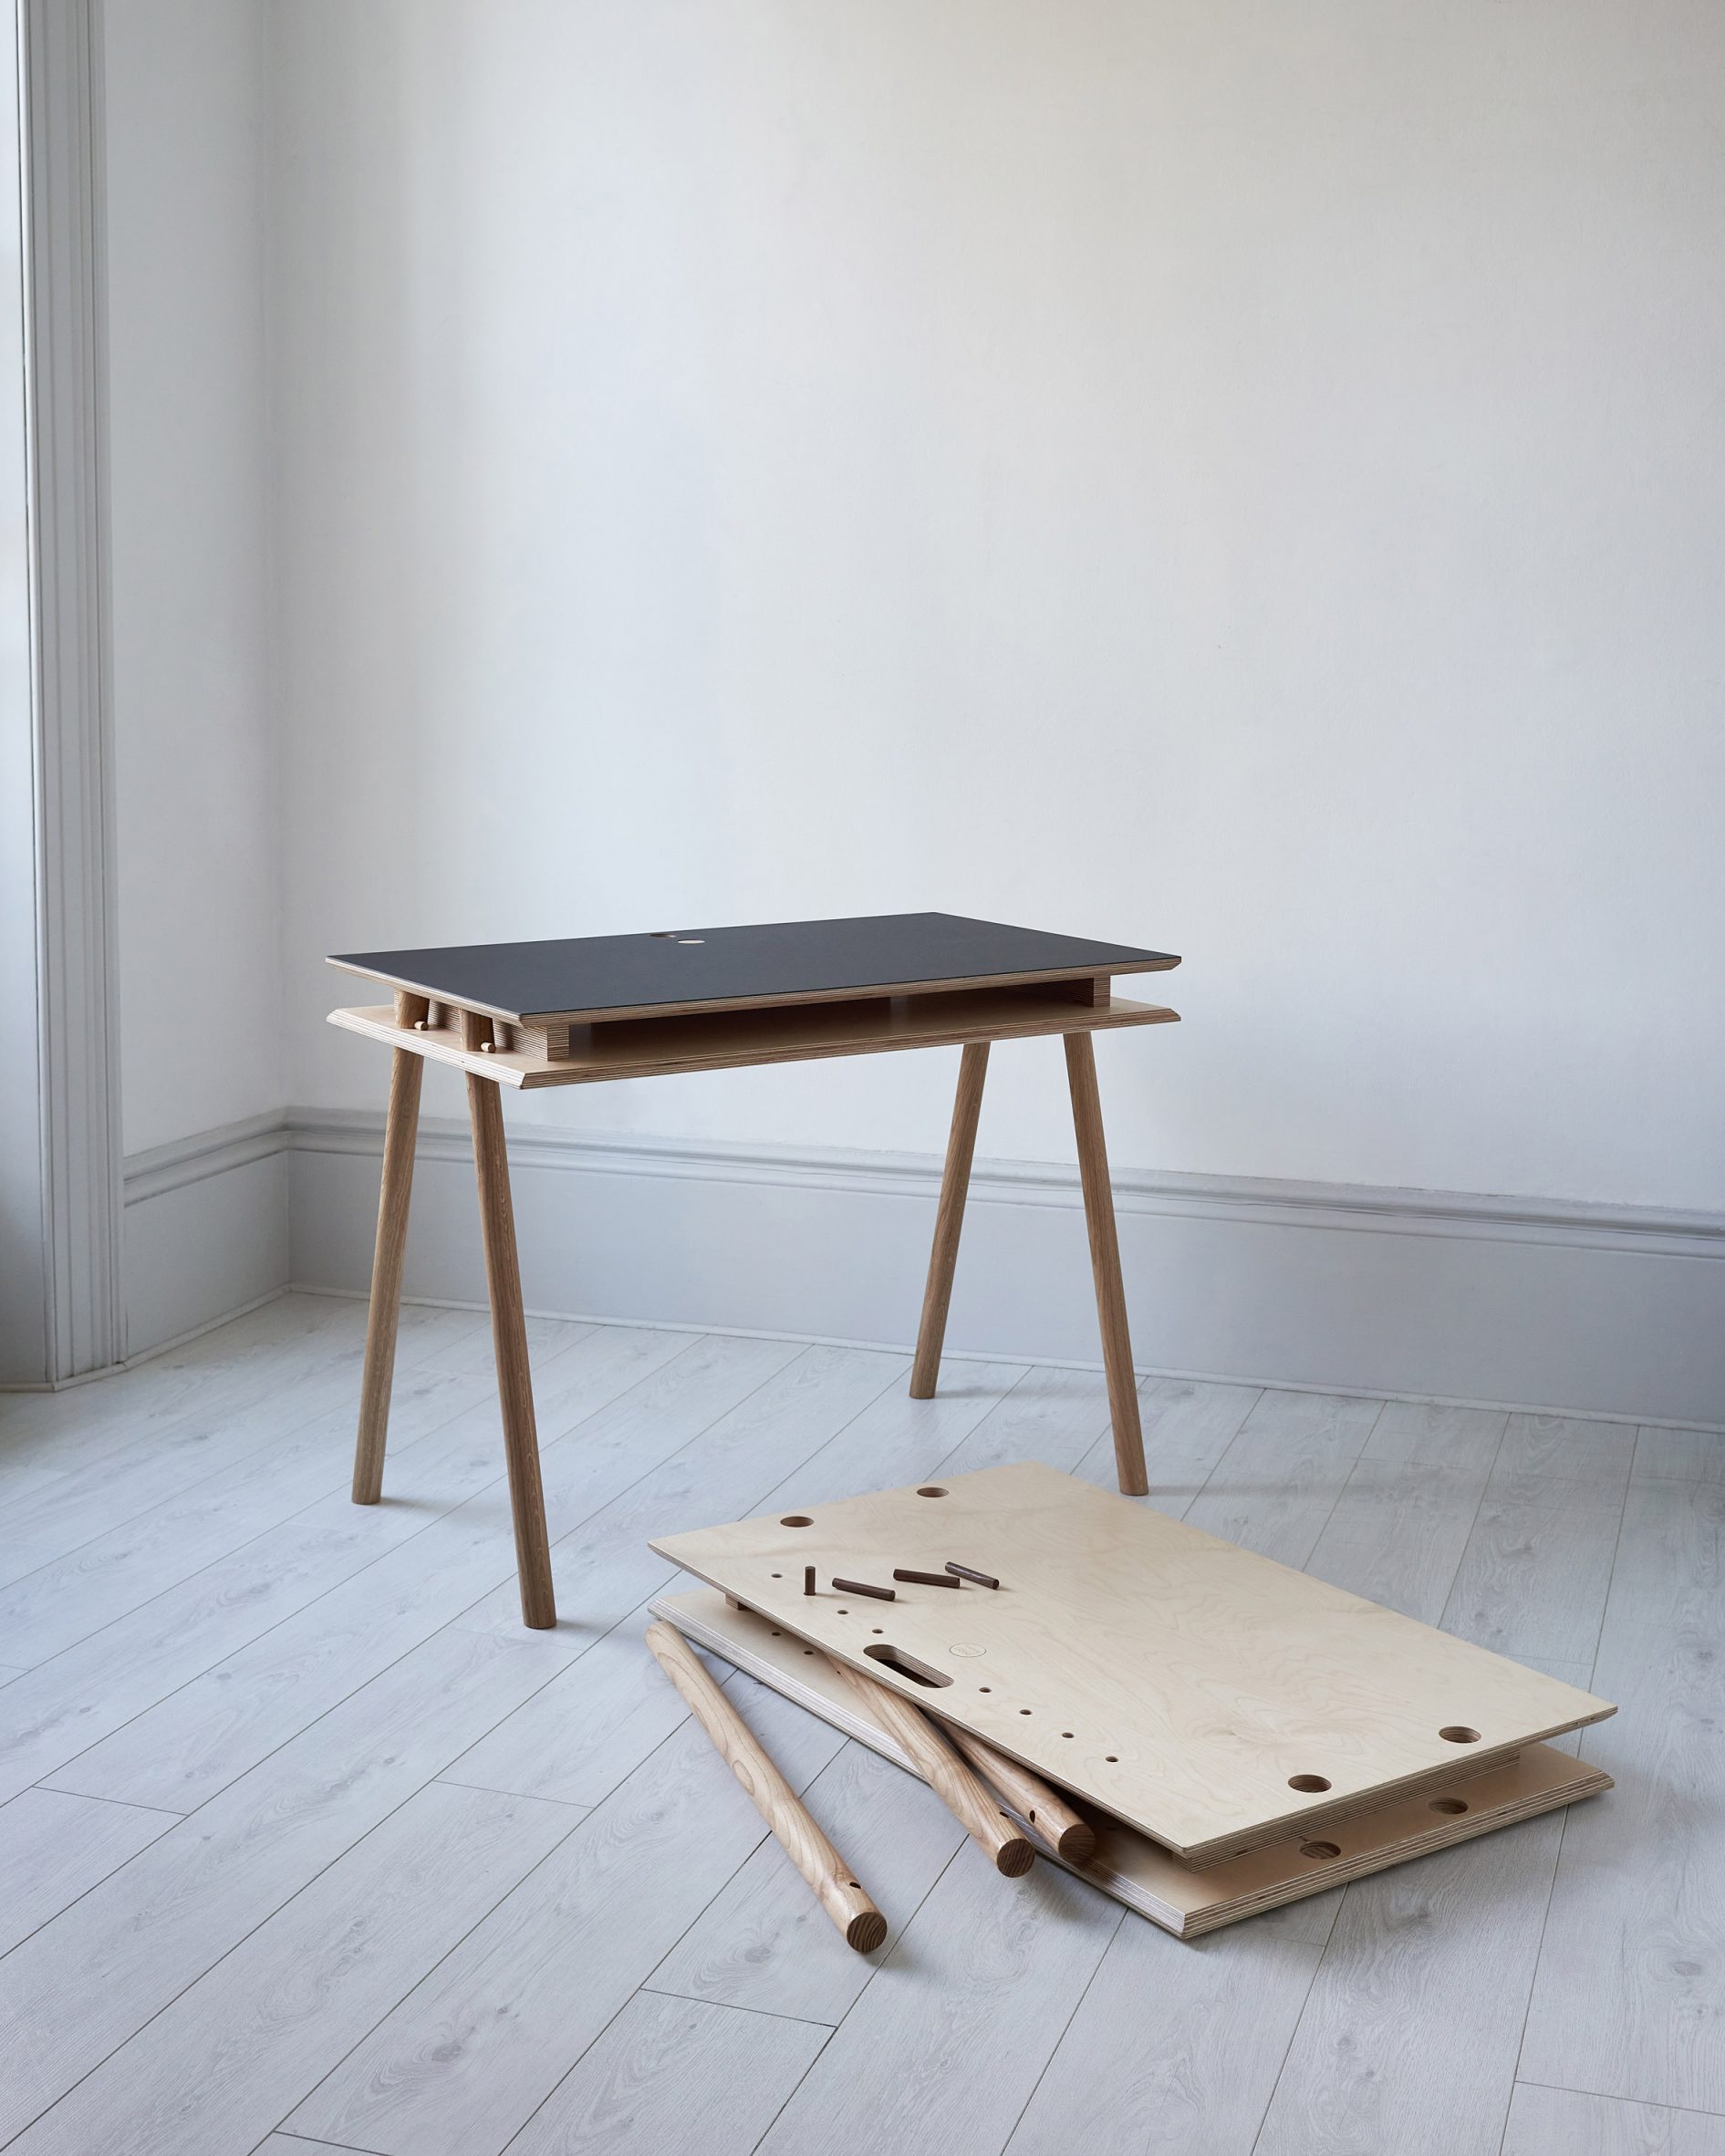 A wooden desk and its parts